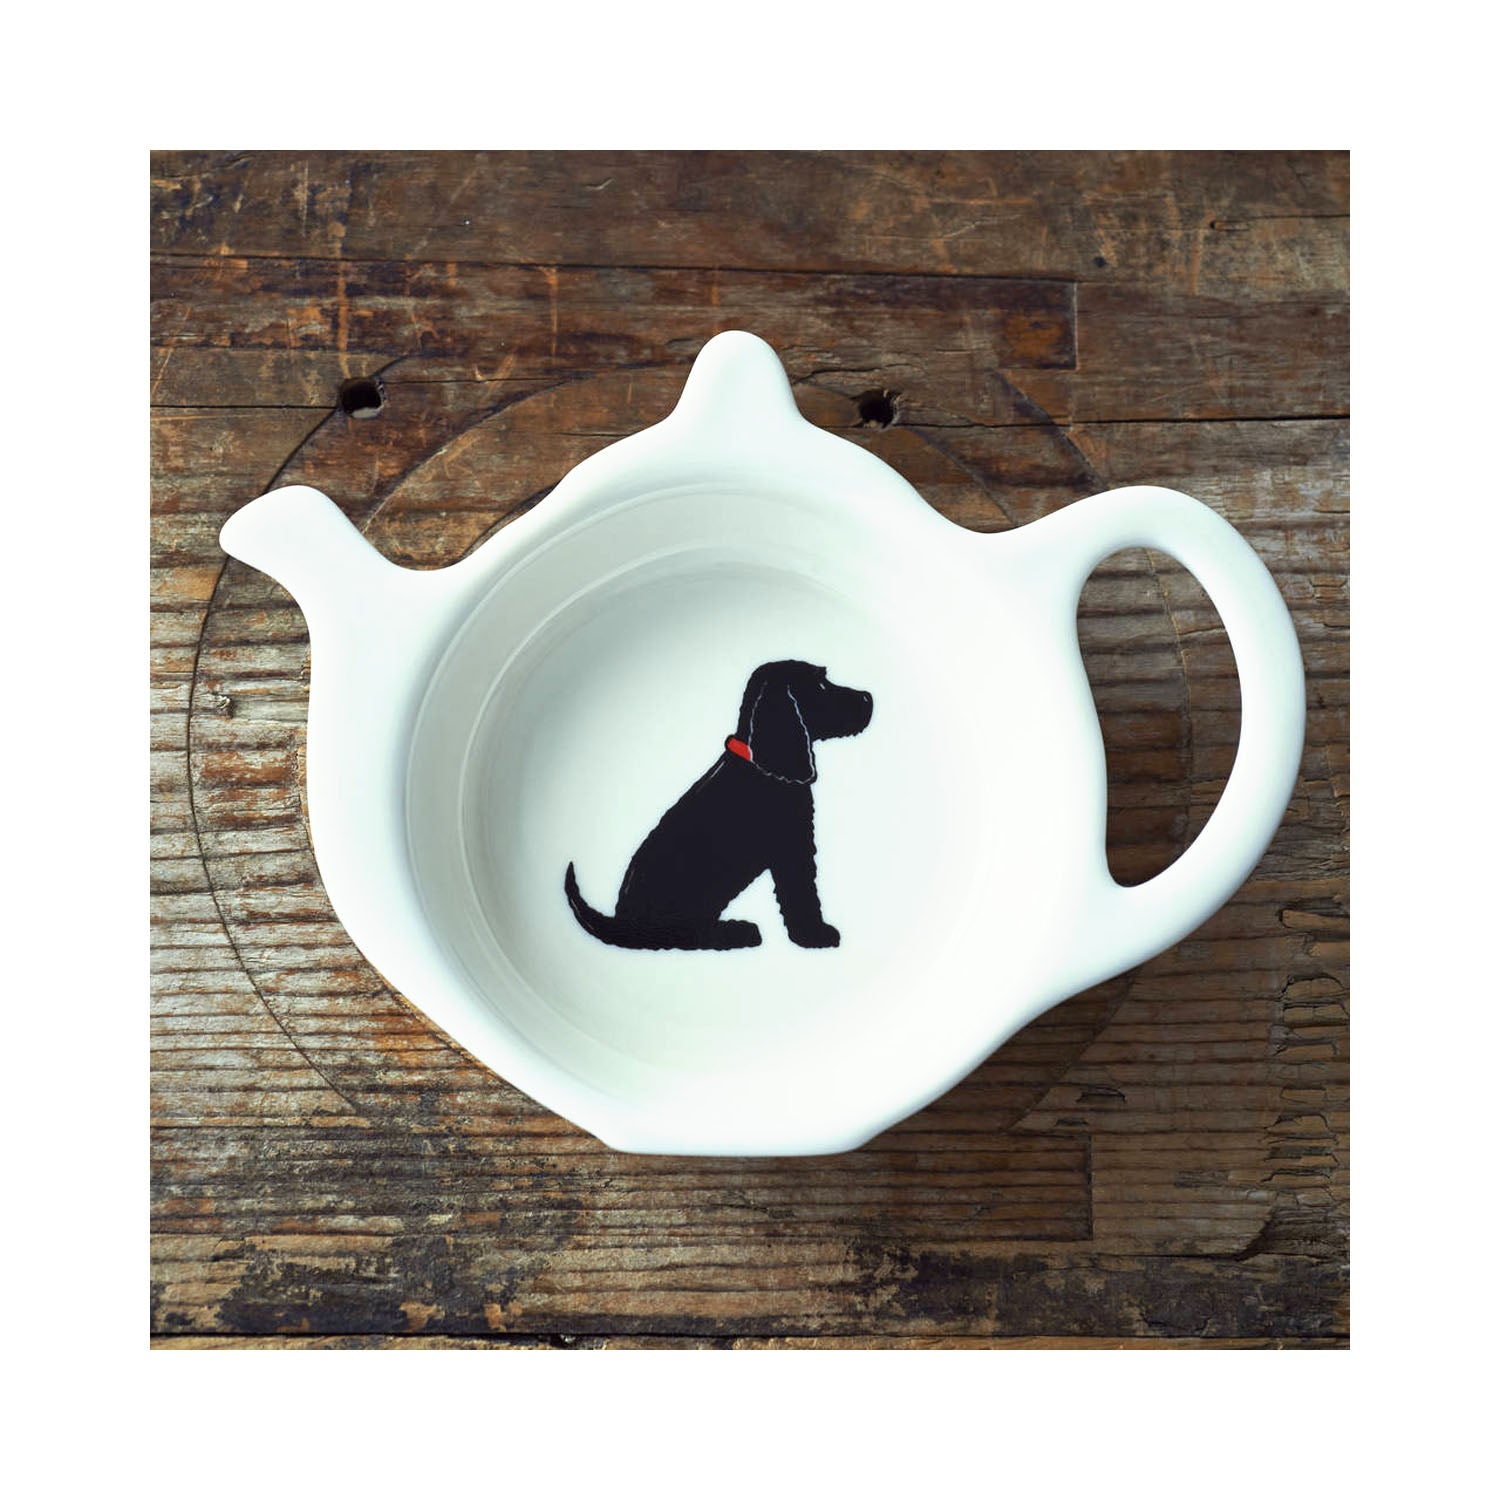 Dog Lover Gifts available at Dog Krazy Gifts - Hugo The Black Cocker Spaniel Teabag Dish - part of the Sweet William range available from Dog Krazy Gifts